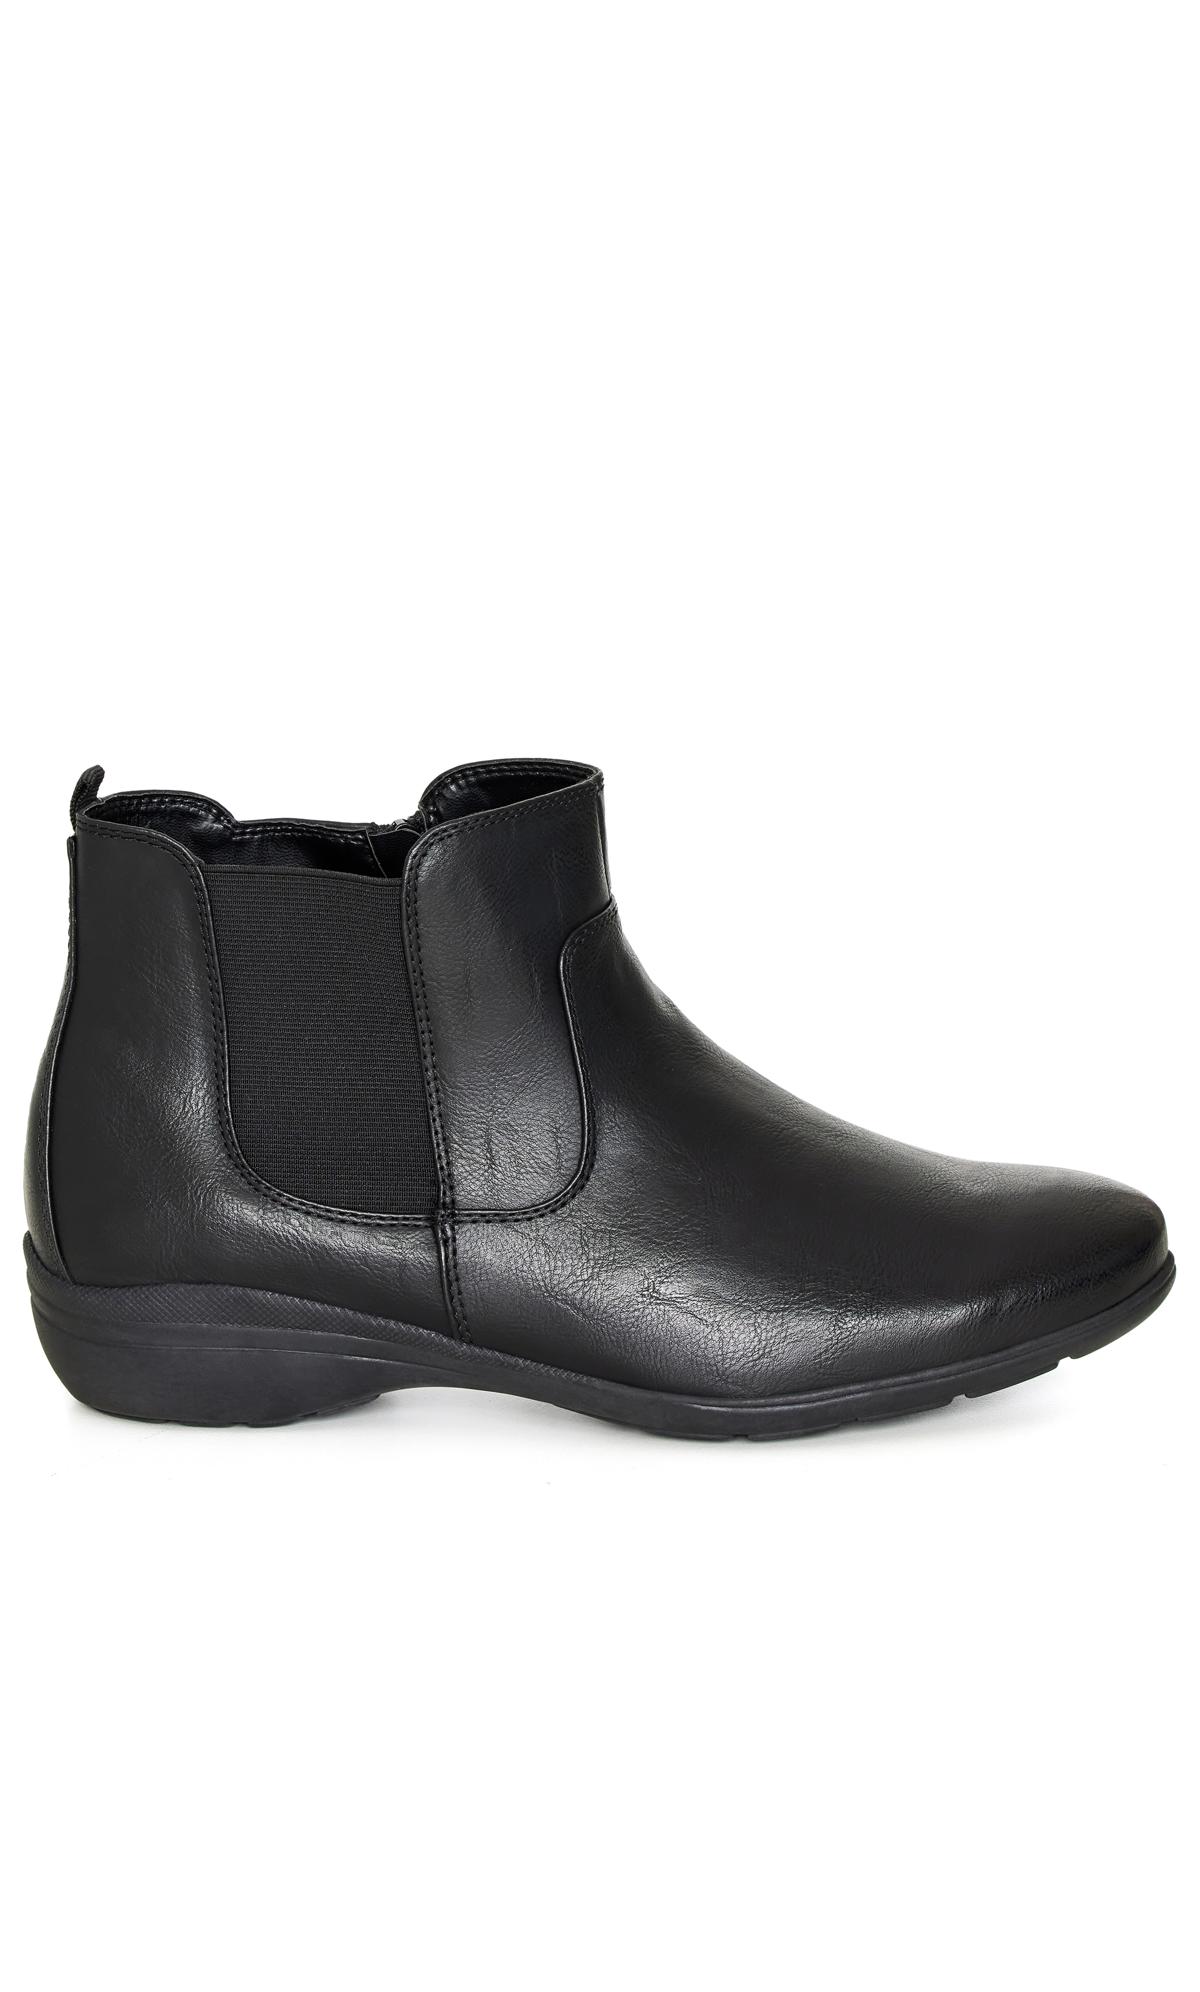 Bree Black Extra Wide Ankle Boot | Evans